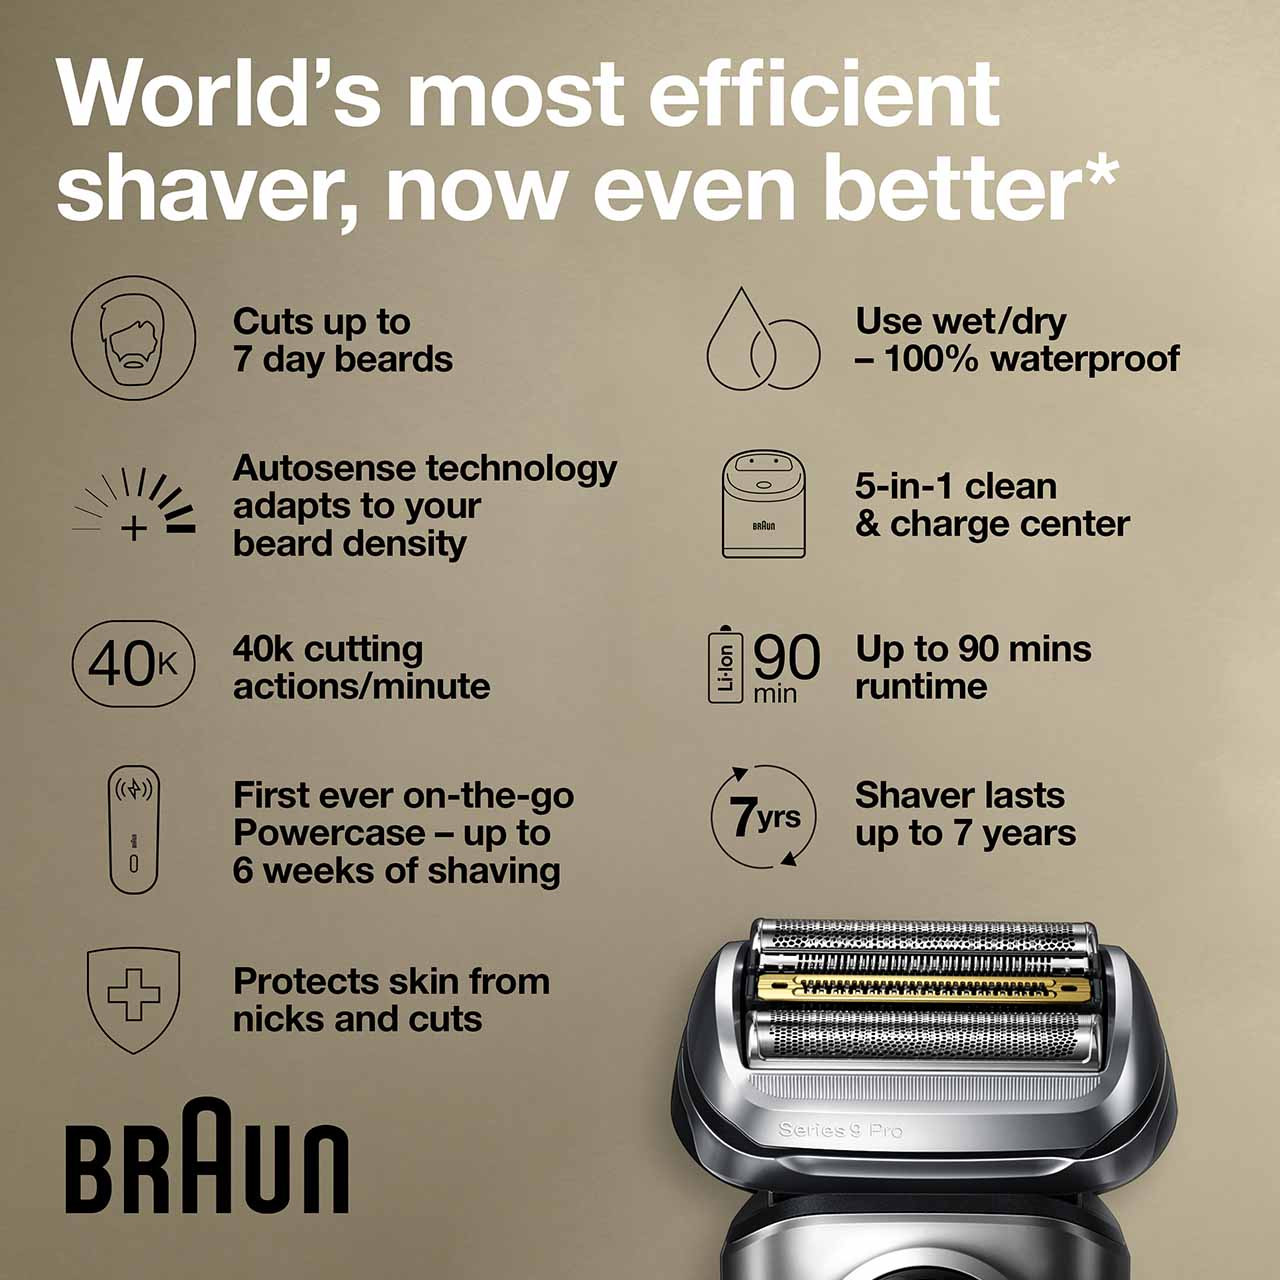 Review: You Need to Know About the Braun Series 9 Pro